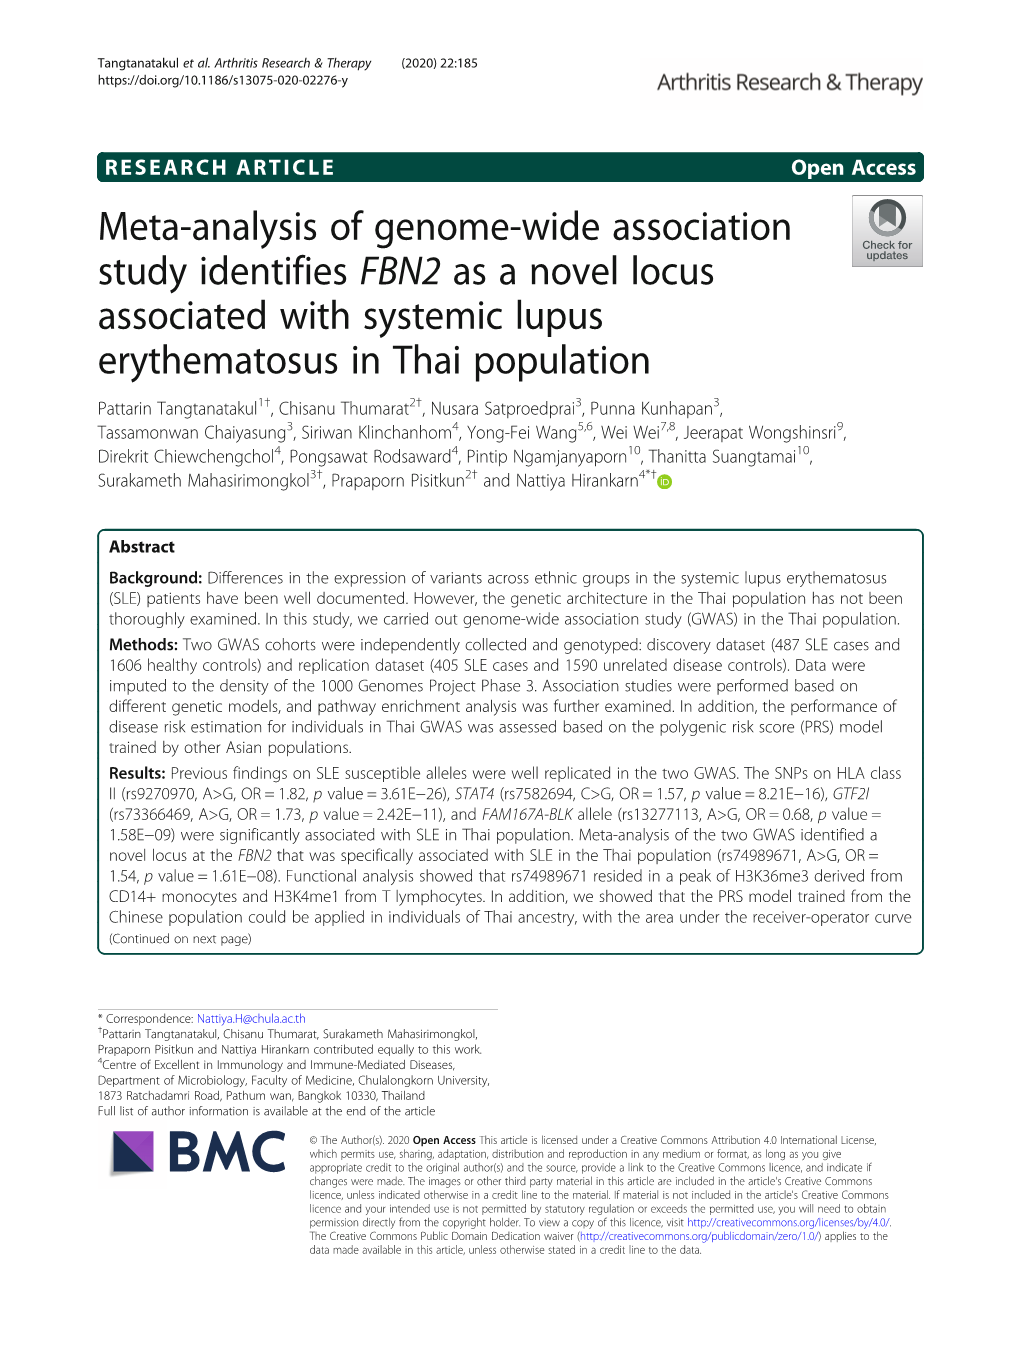 Meta-Analysis of Genome-Wide Association Study Identifies FBN2 As a Novel Locus Associated with Systemic Lupus Erythematosus In